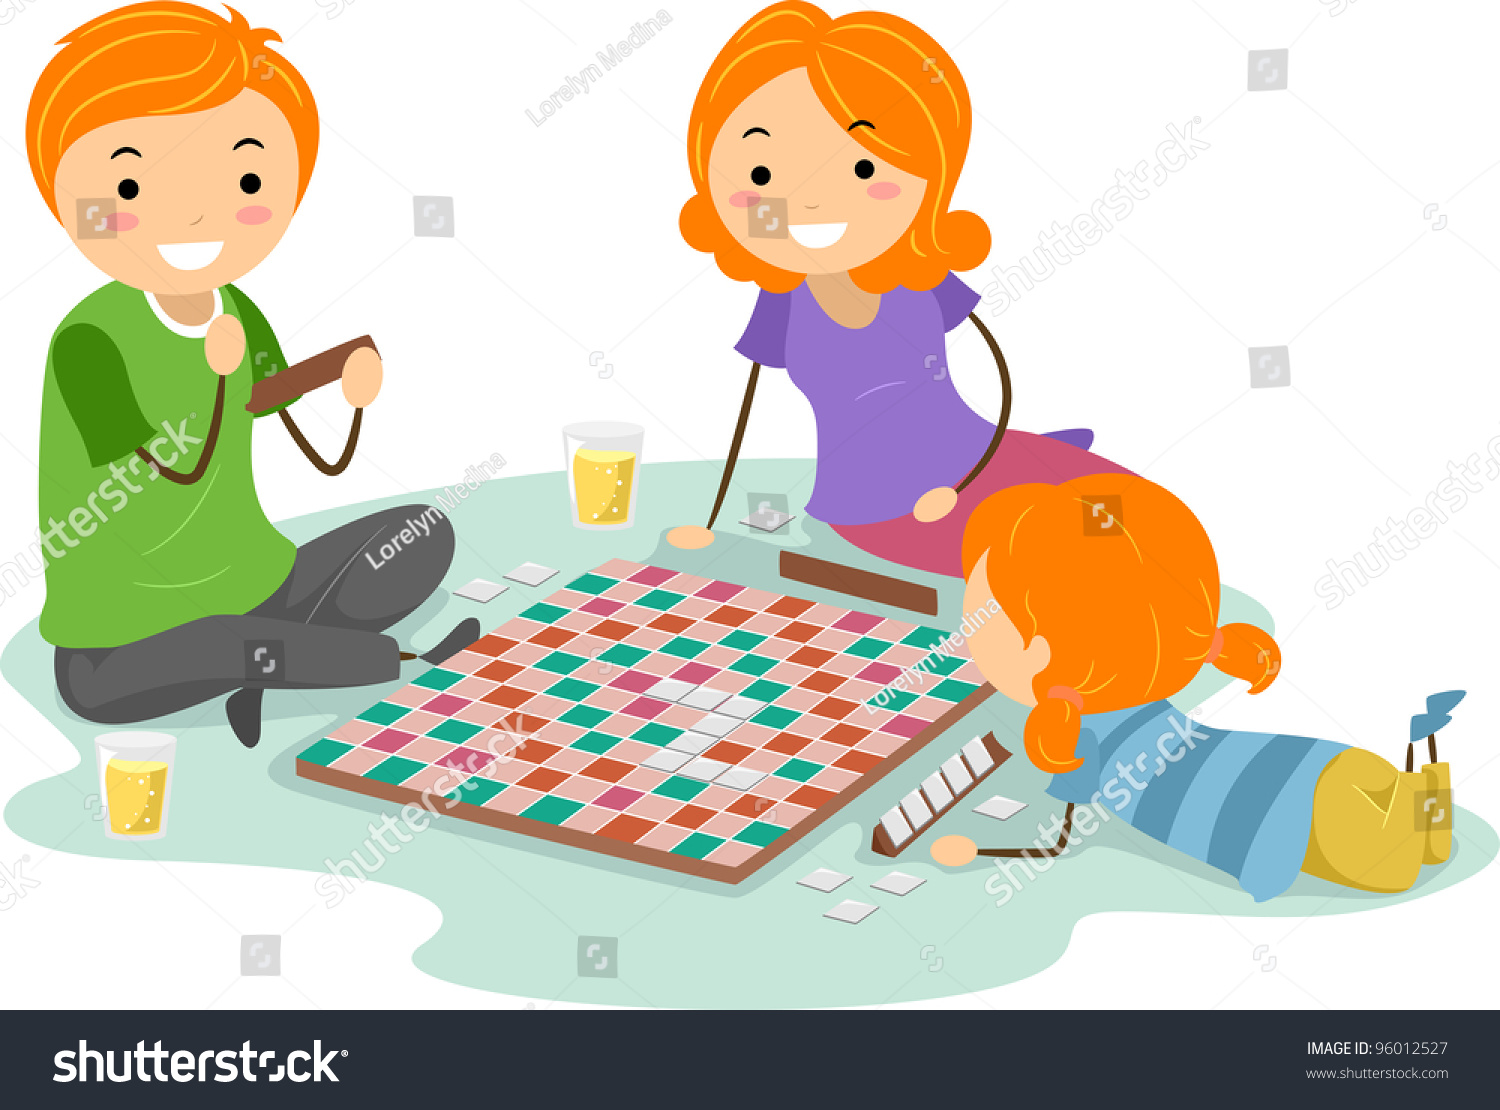 outdoor play clipart - photo #50